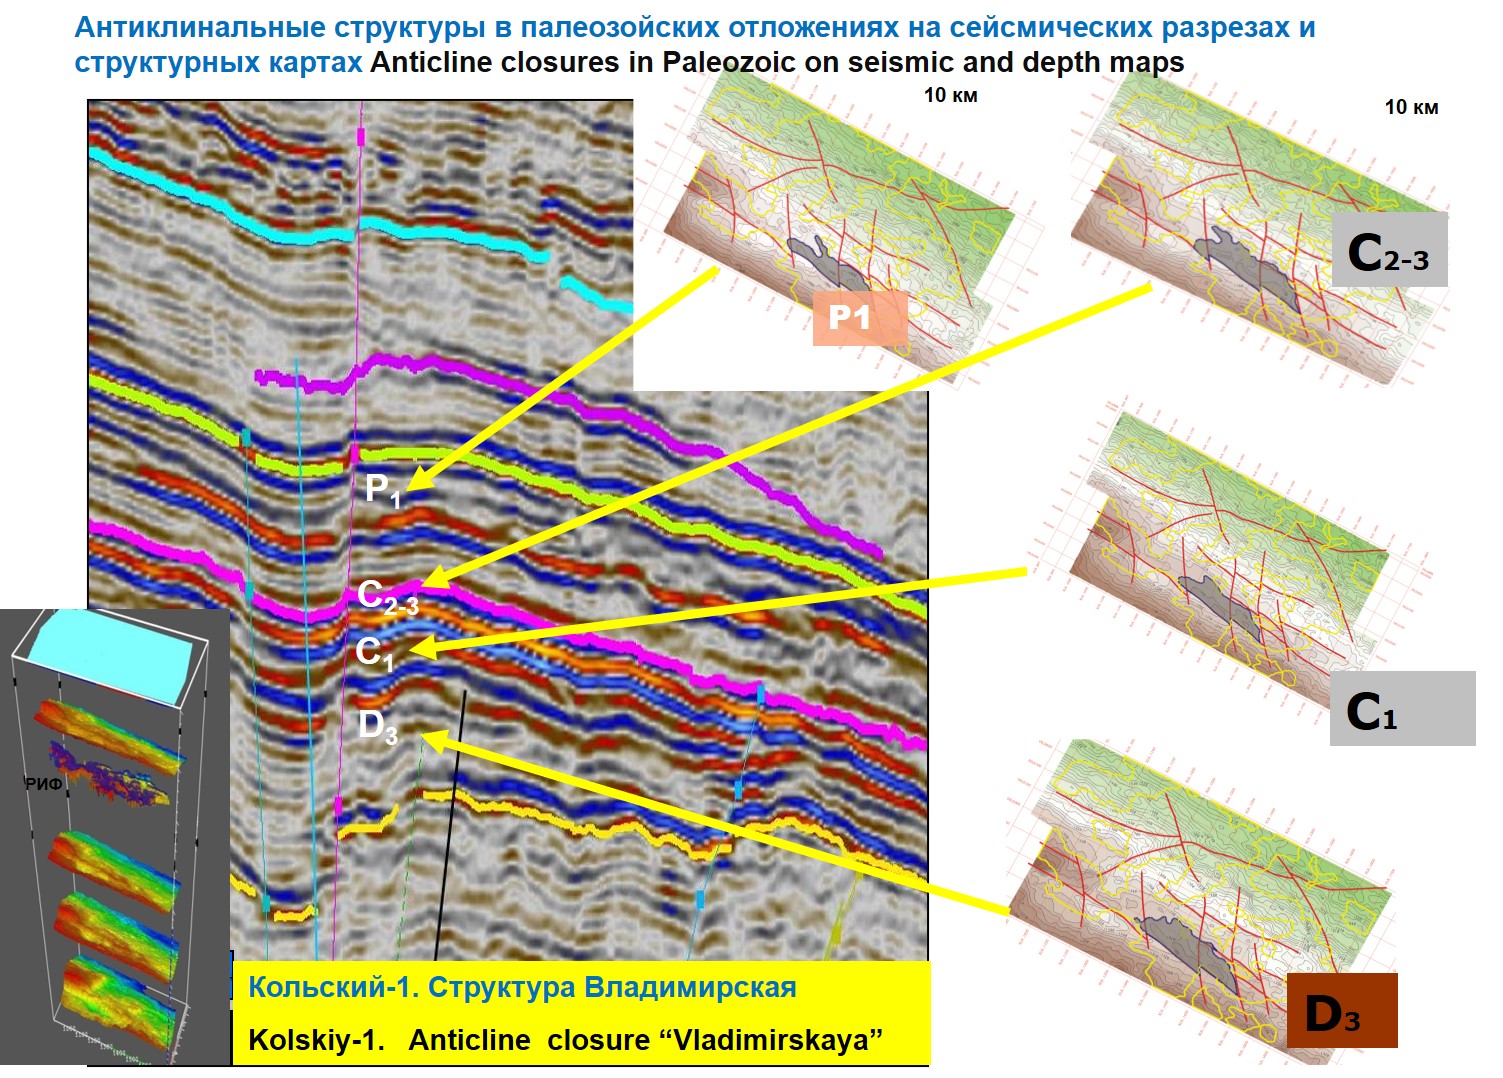 Anticlinal structures in Paleozoic sediments in seismic sections and structural maps